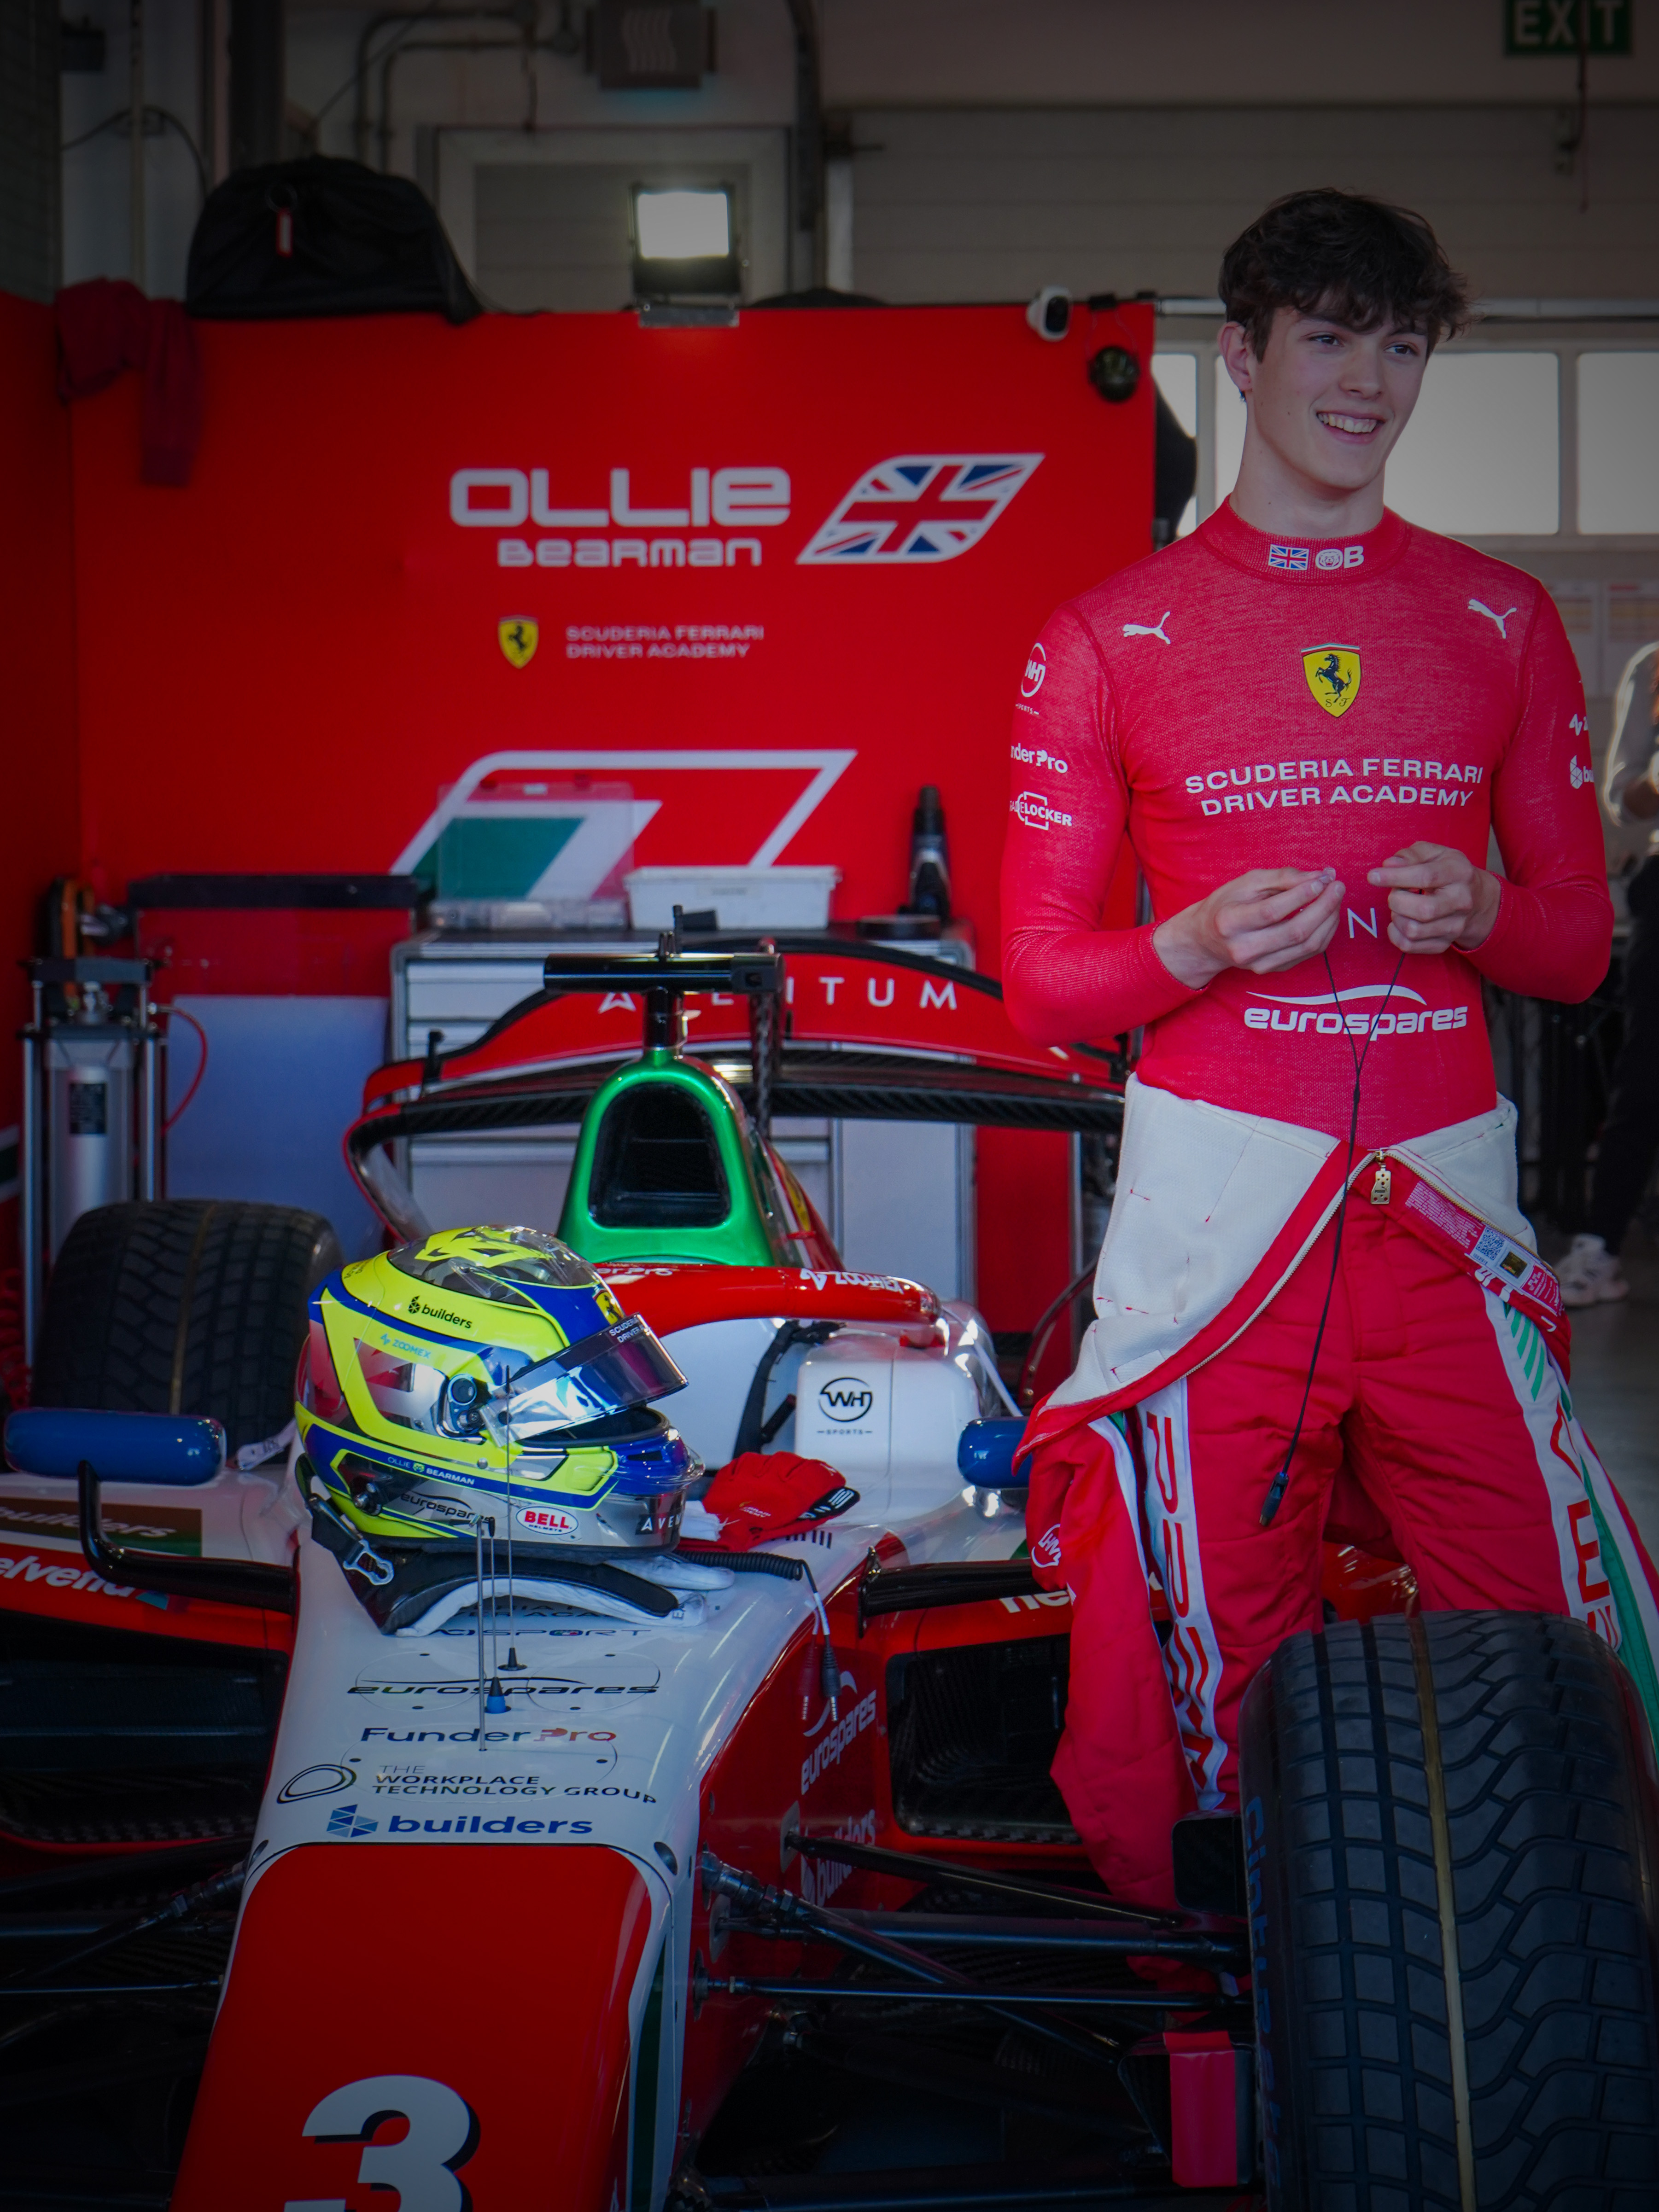 Image of young racing driver Oliver Bearman standing next to his Formula 2 car in the Prema Racing team garage at the 2024 Bahrain F2 race weekend. He is wearing his racing suit with the Eurospares sponsor logo visible on his shirt.